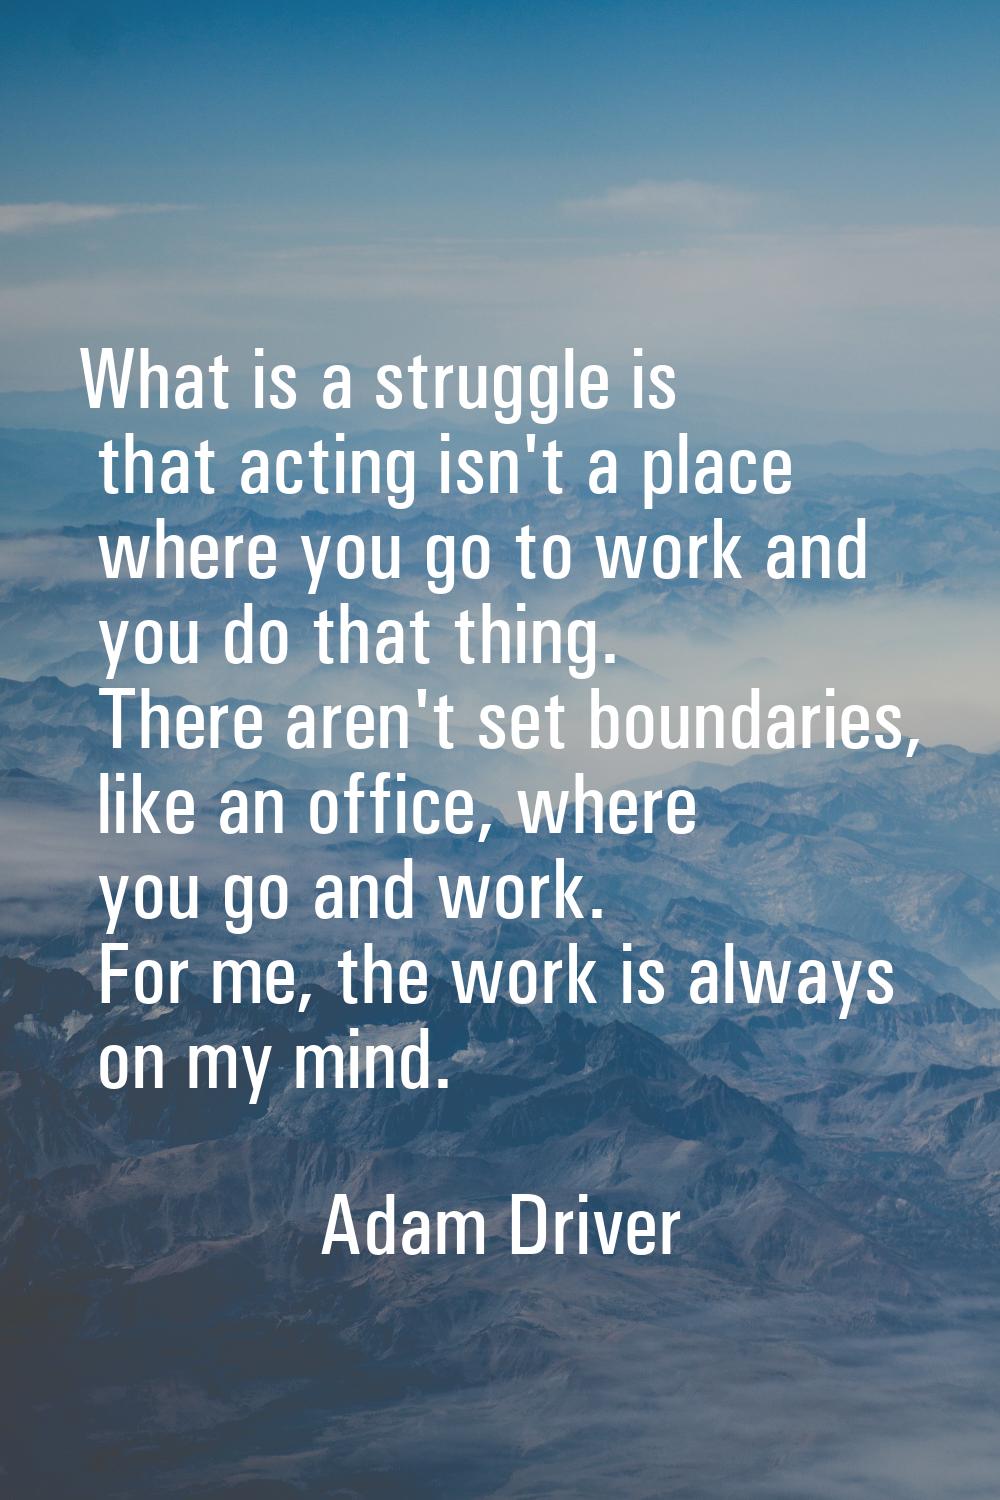 What is a struggle is that acting isn't a place where you go to work and you do that thing. There a